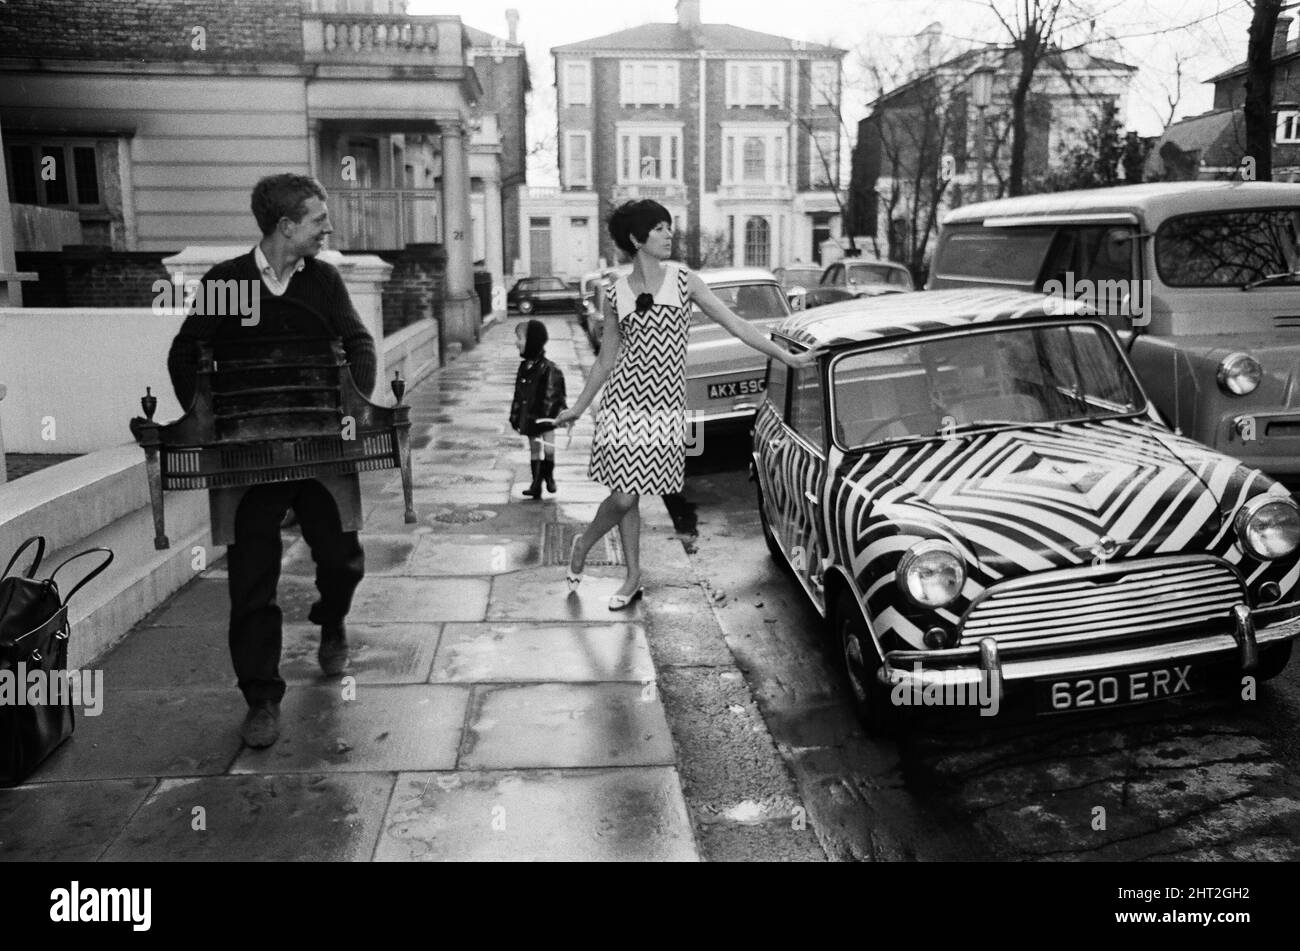 Here it is! The car for the Op Art girl (optical art girl) who likes all her accessories to match, pictured 24th March 1966.   The art was designed & applied by amateur artist Danae Brook, and the car is for sale in Thames Ditton, Surrey; costing £385. But this does not include the cost of the dress, designed by Shubelle & which costs 79 shillings. Stock Photo